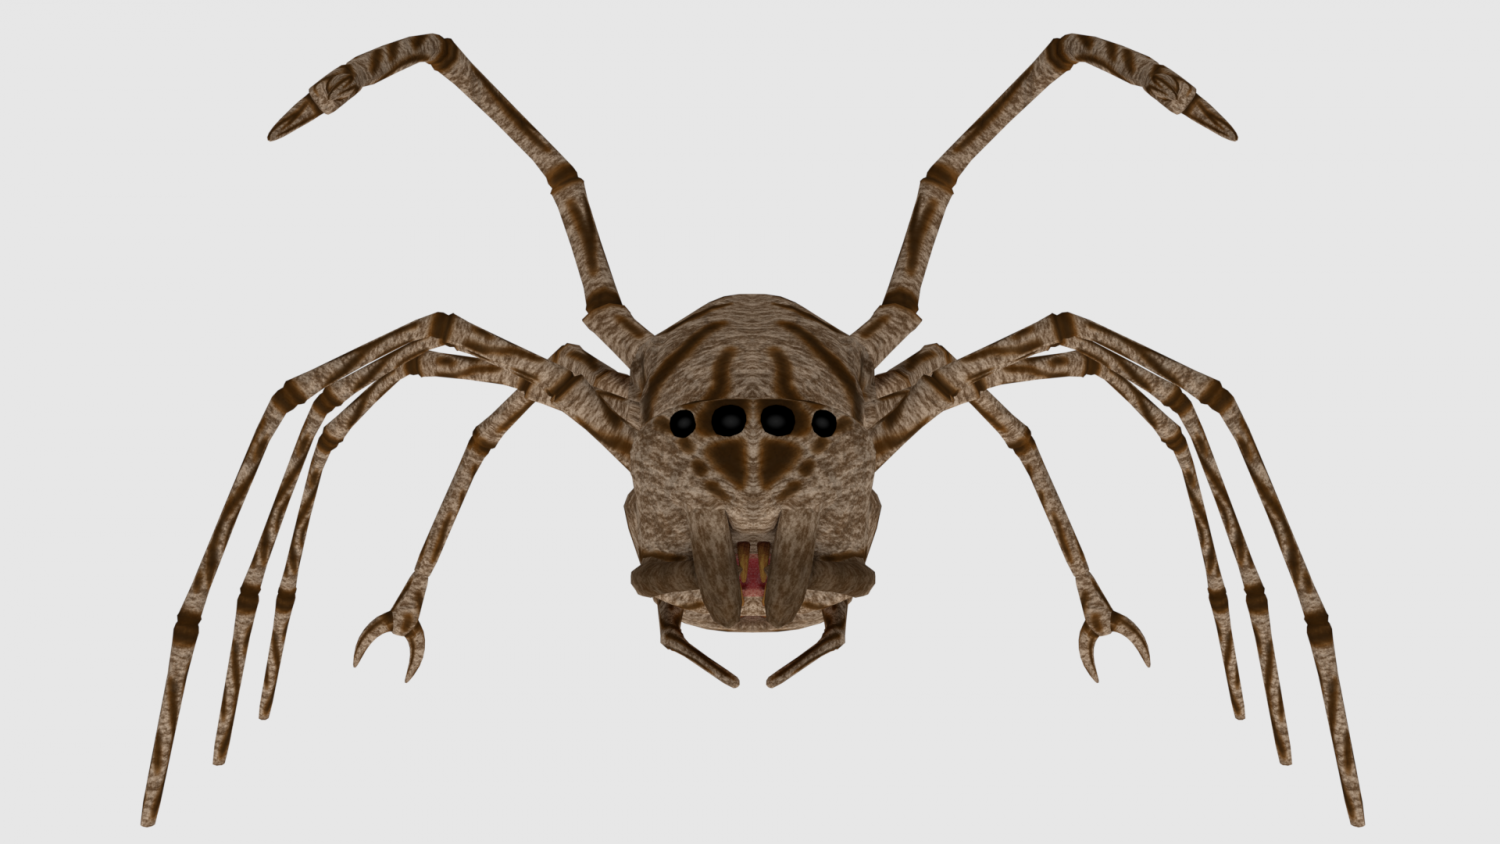 To continue... spider monster - game ready Model 3D. 